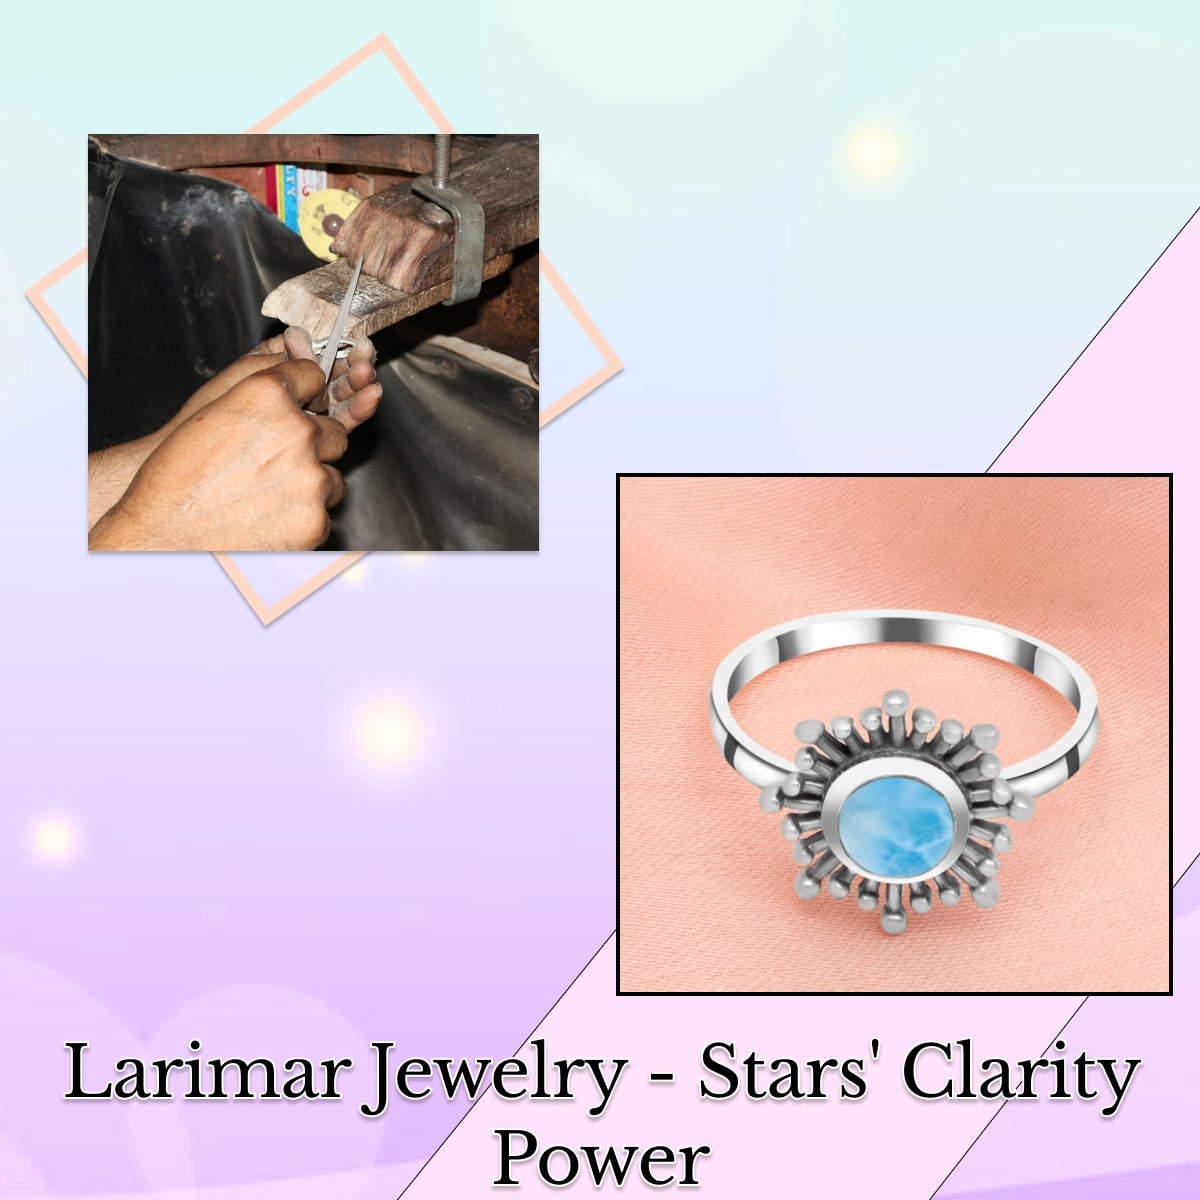 Larimar Jewelry - Harness the Power of the Stars for Clarity and Insight